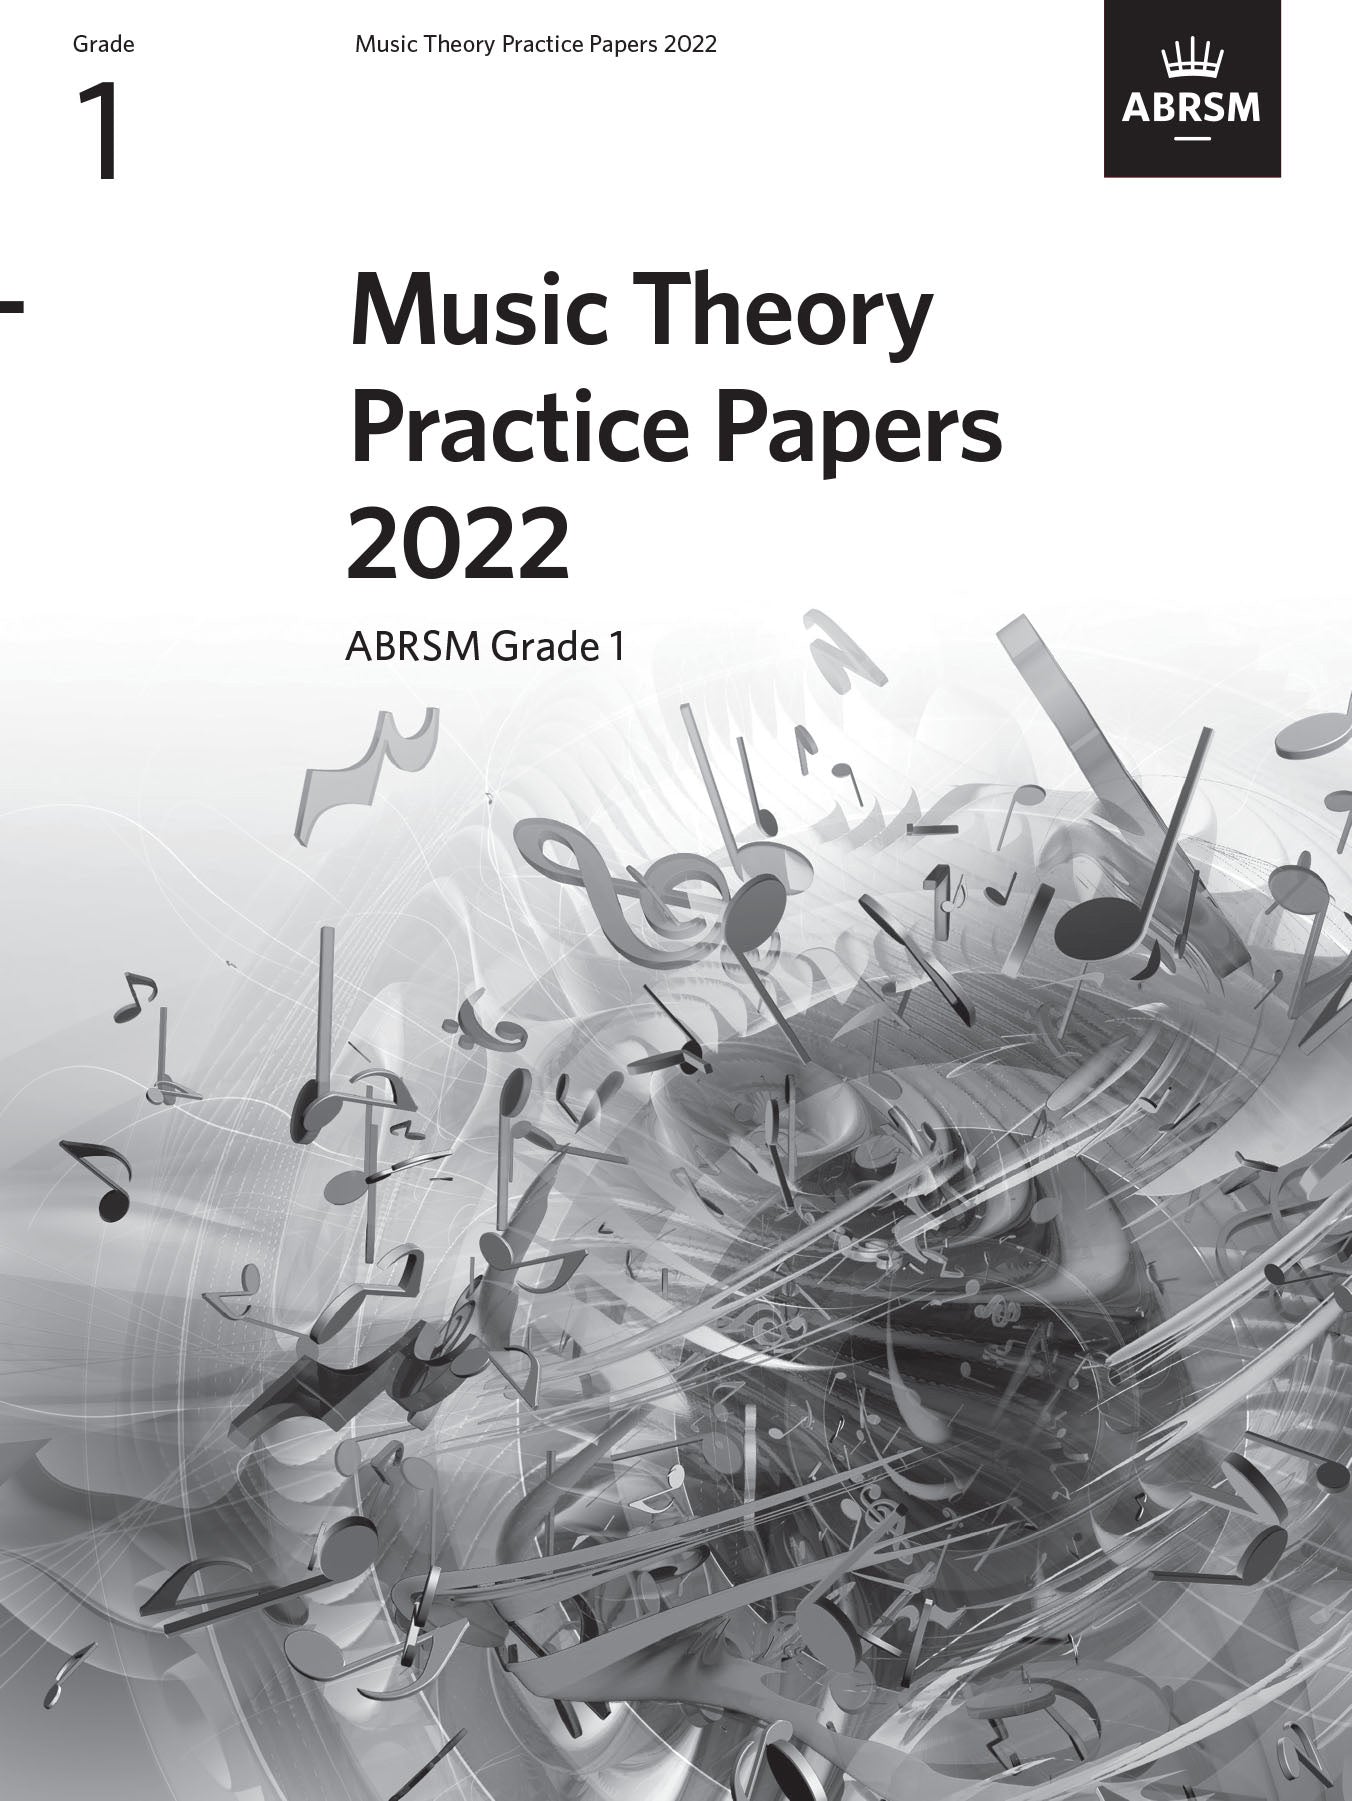 ABRSM Music Theory Practice Papers 2022 Grade 1